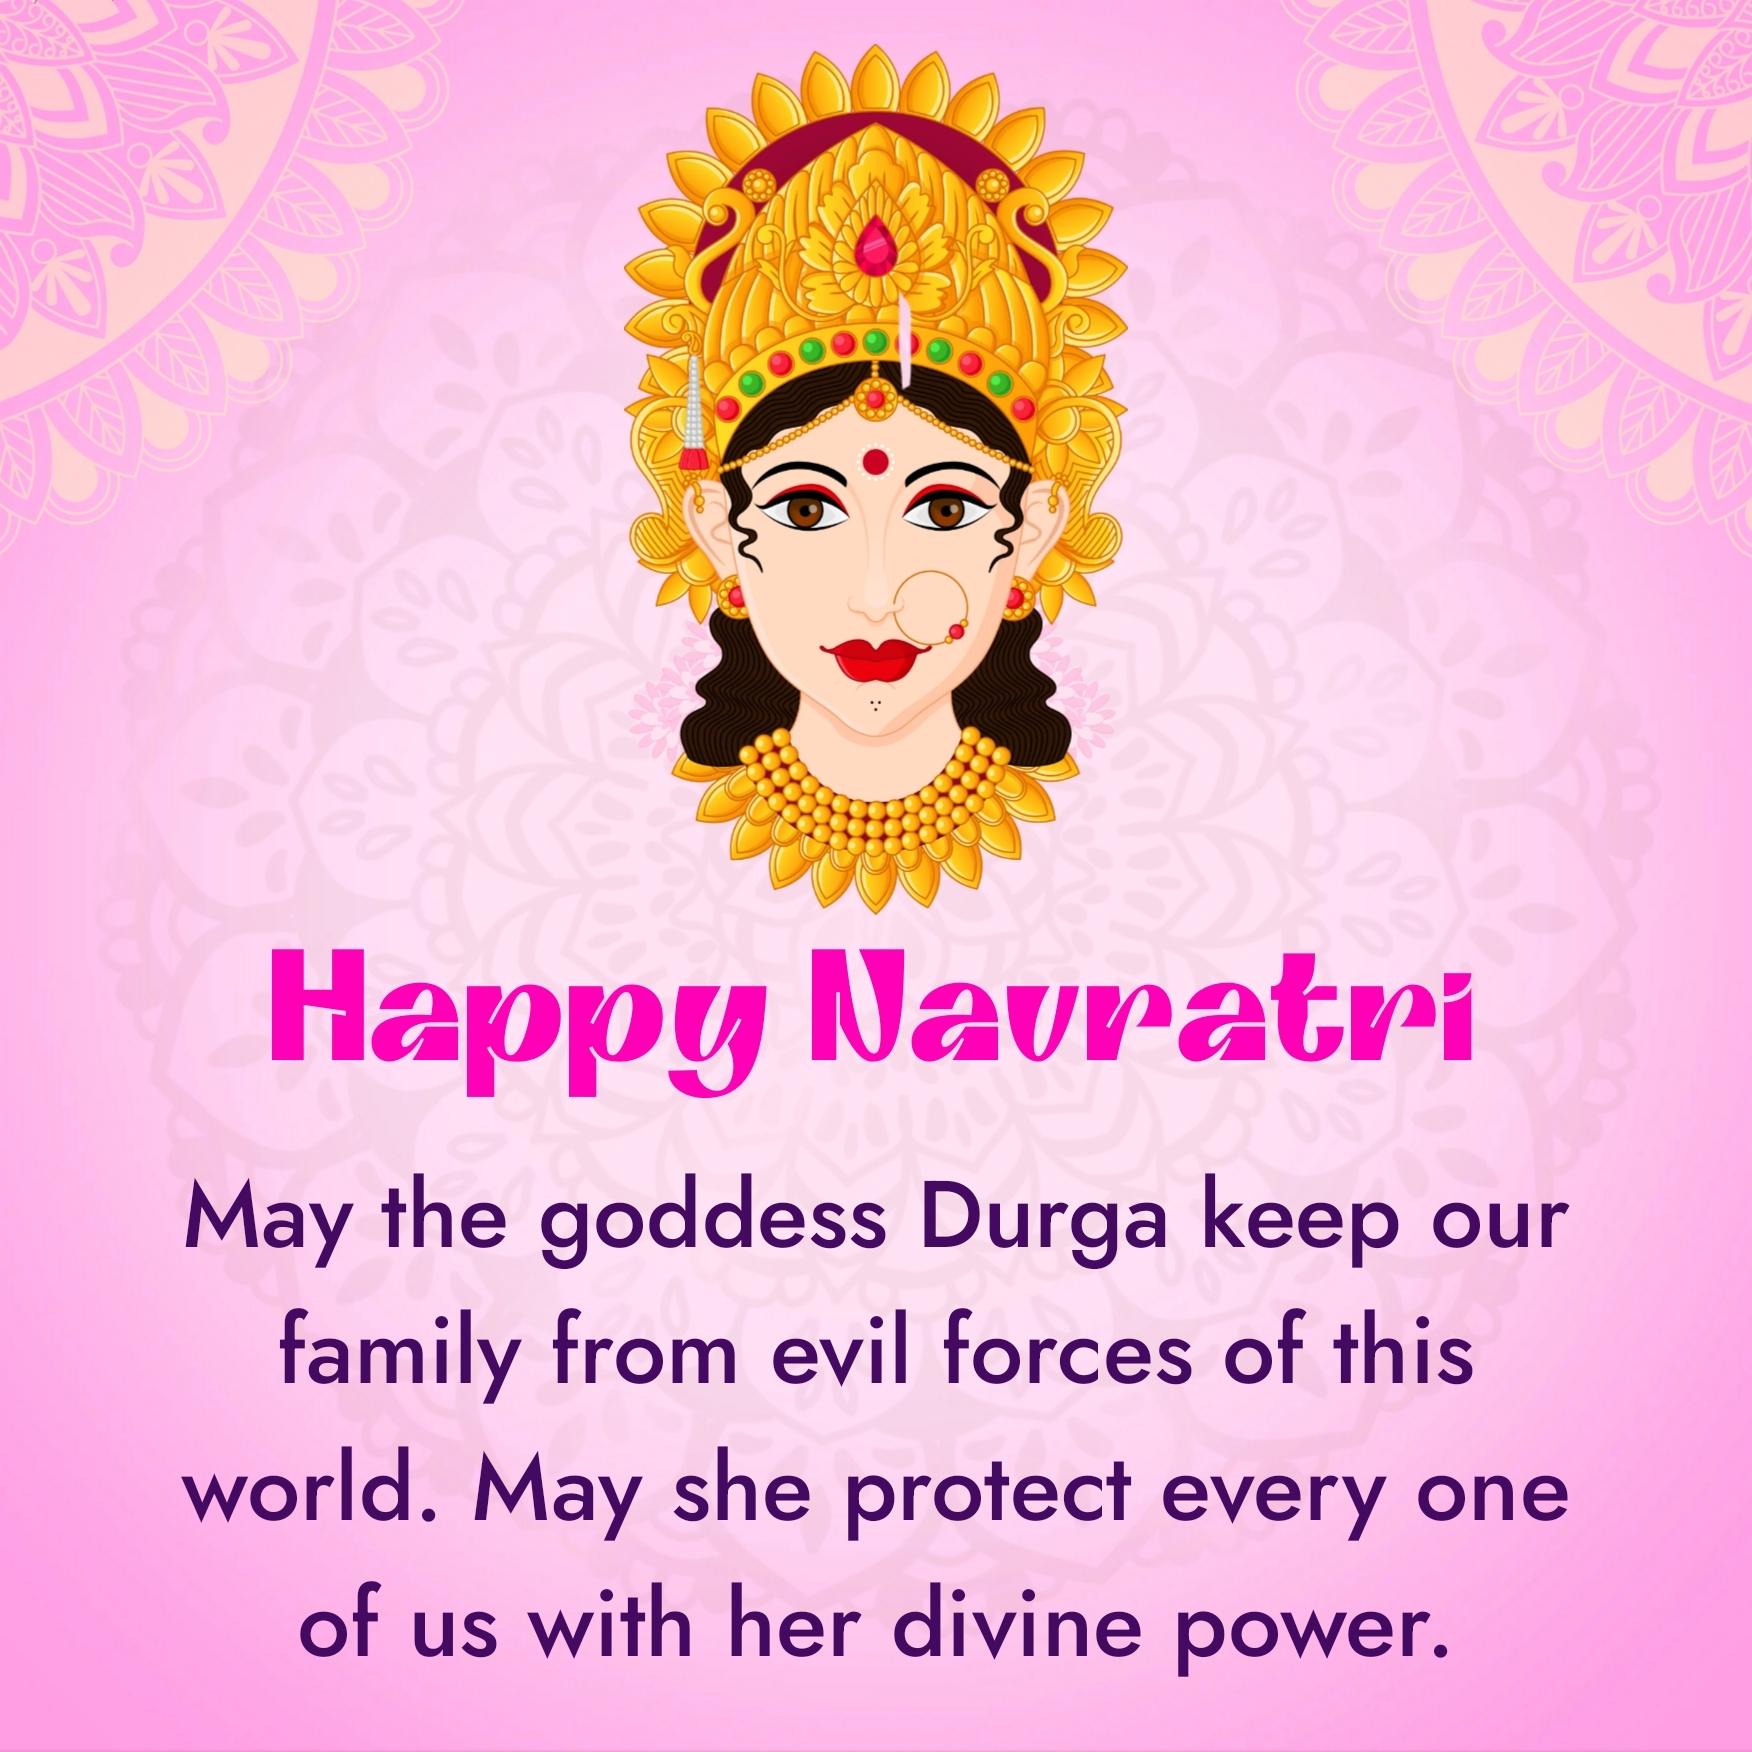 May the goddess Durga keep our family from evil forces